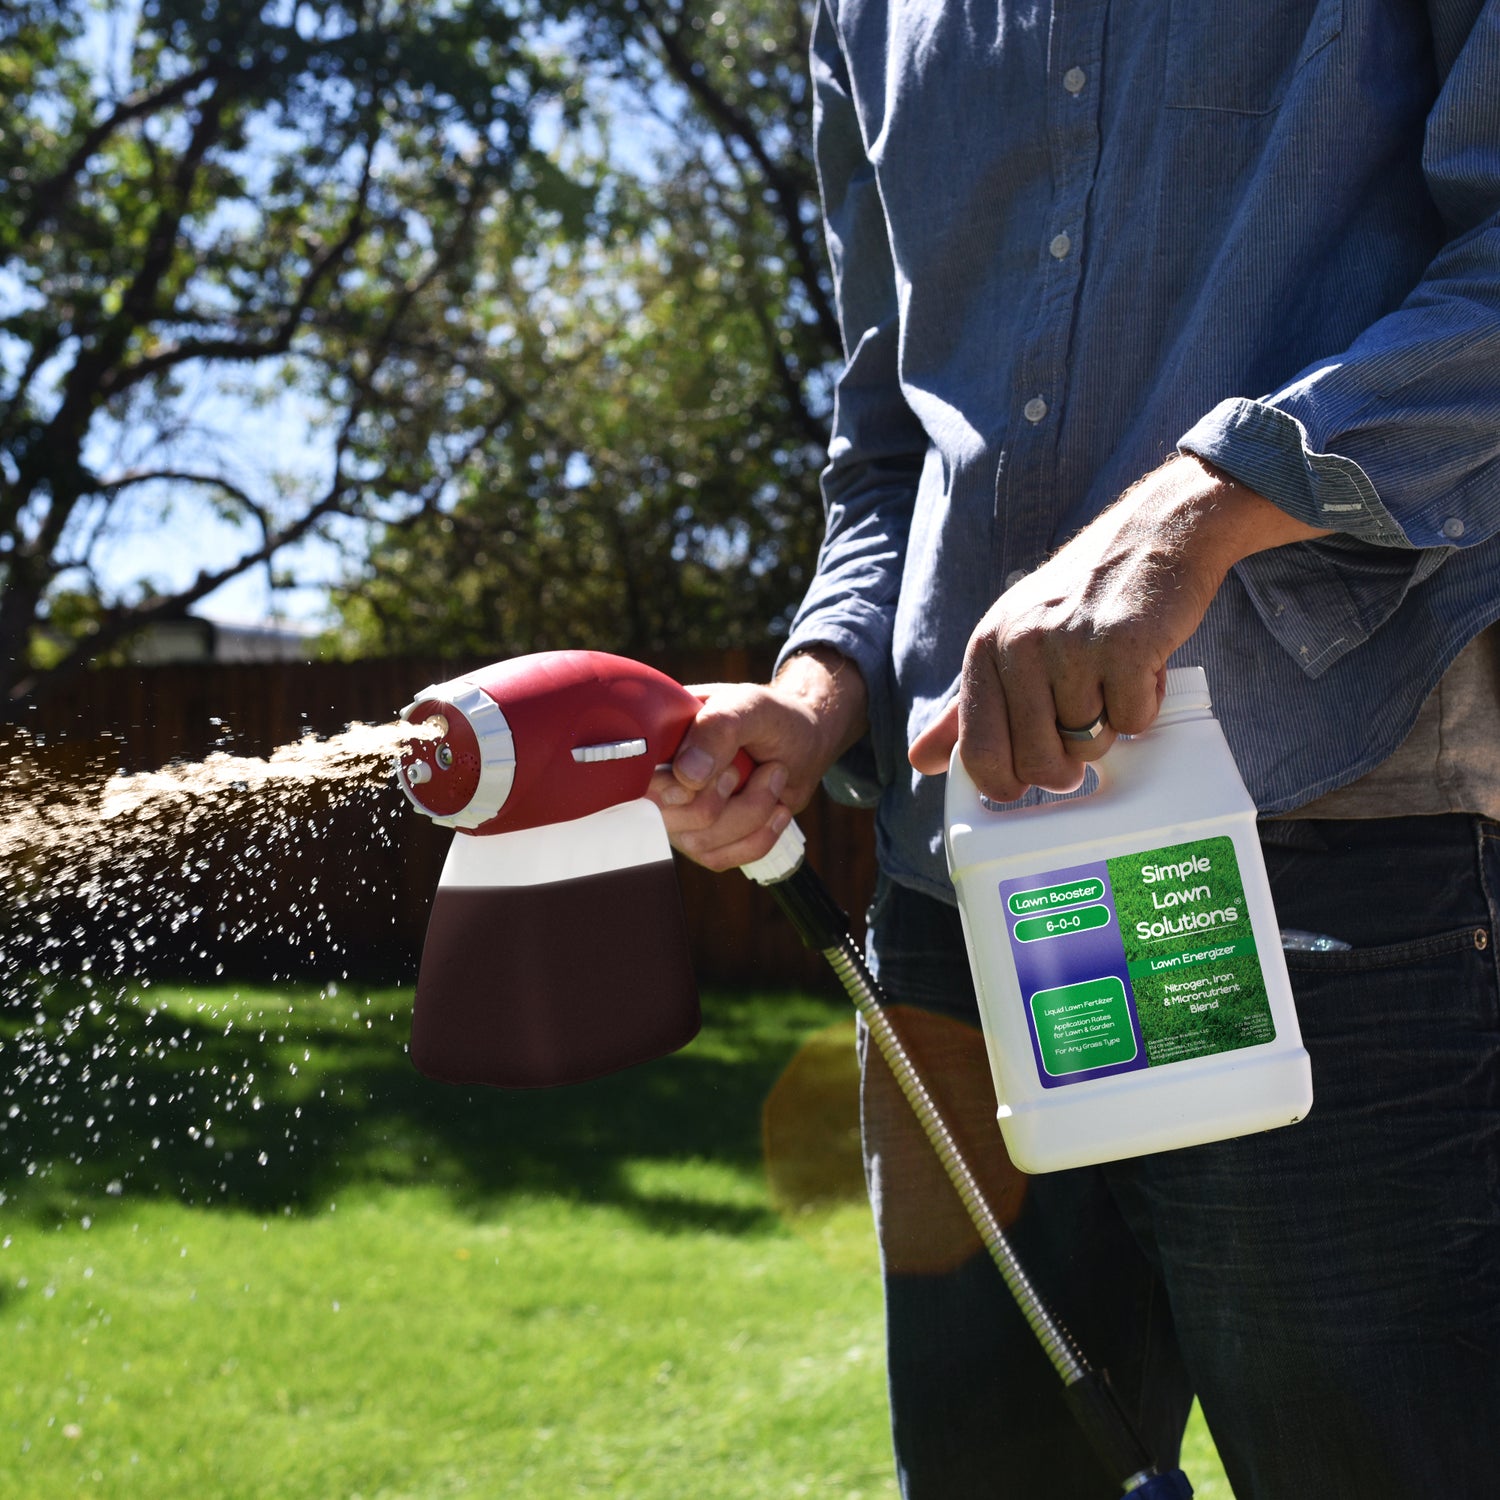 Lawn Energizer liquid lawn booster applied to lawn using ortho hose-end sprayer